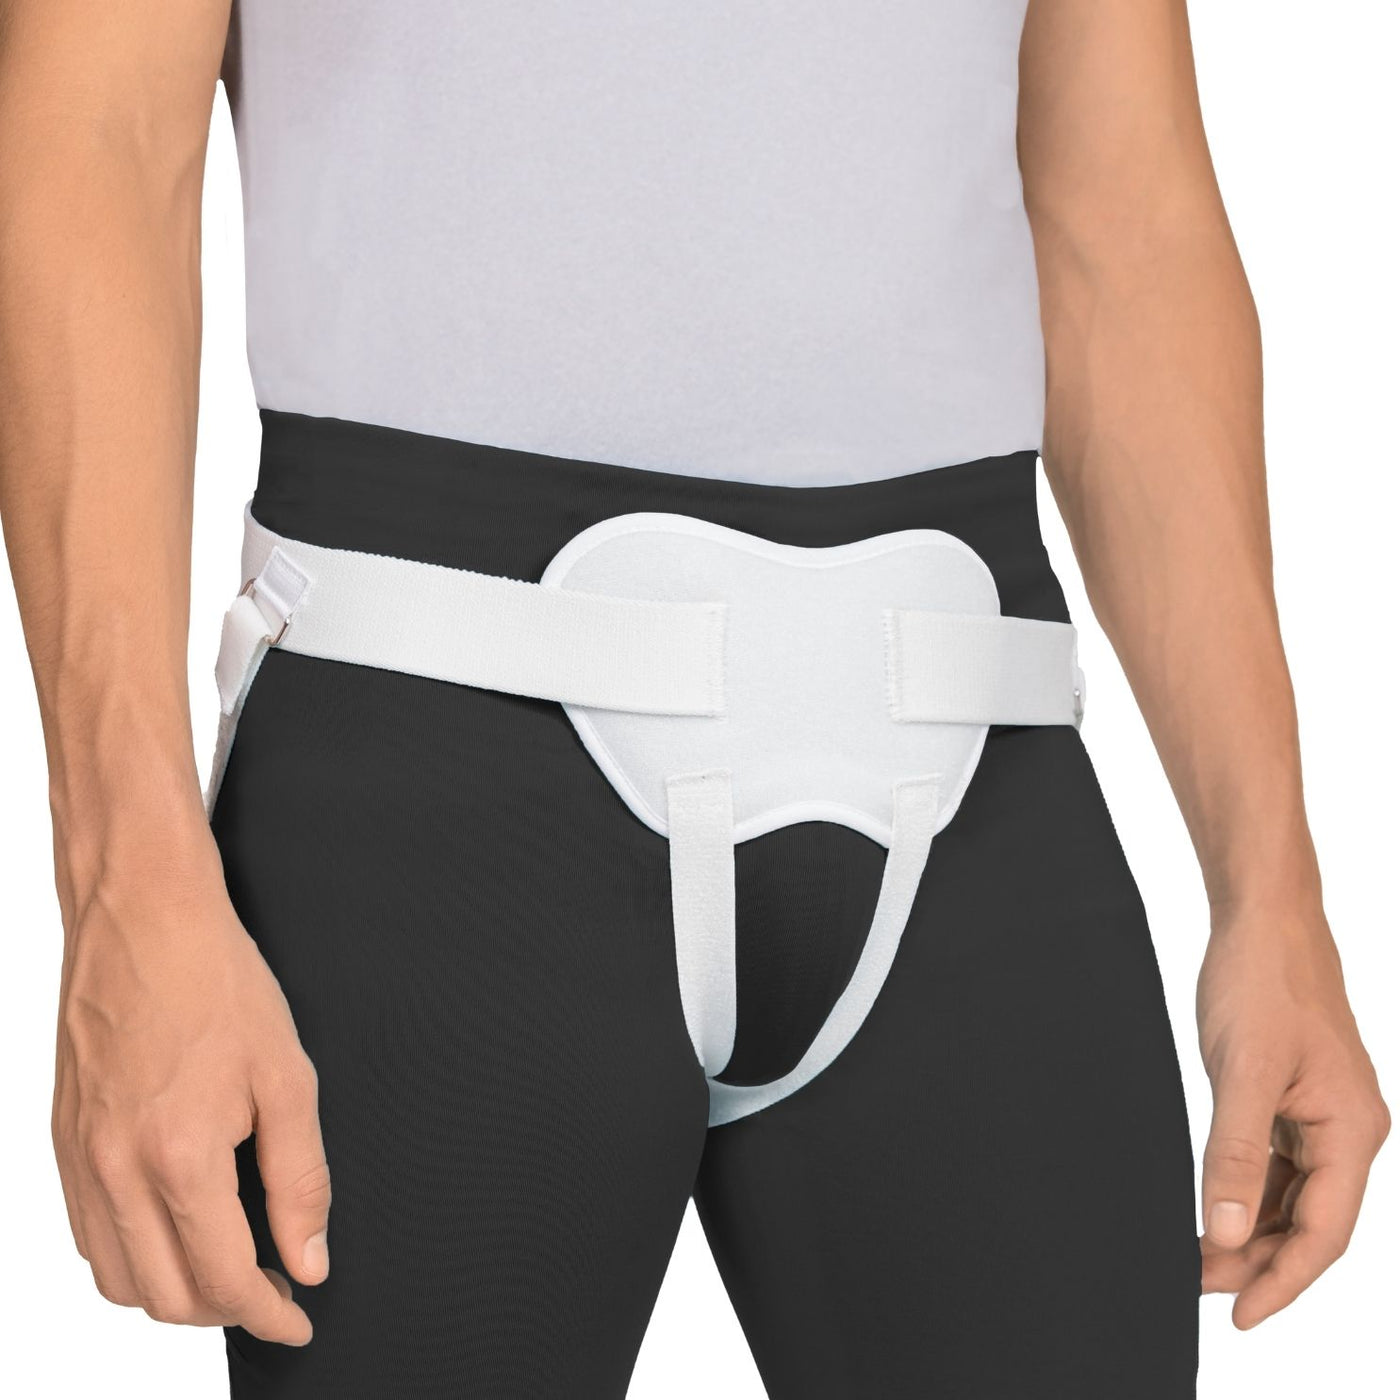 Groin Support Truss  Best Inguinal Hernia Belt for Males